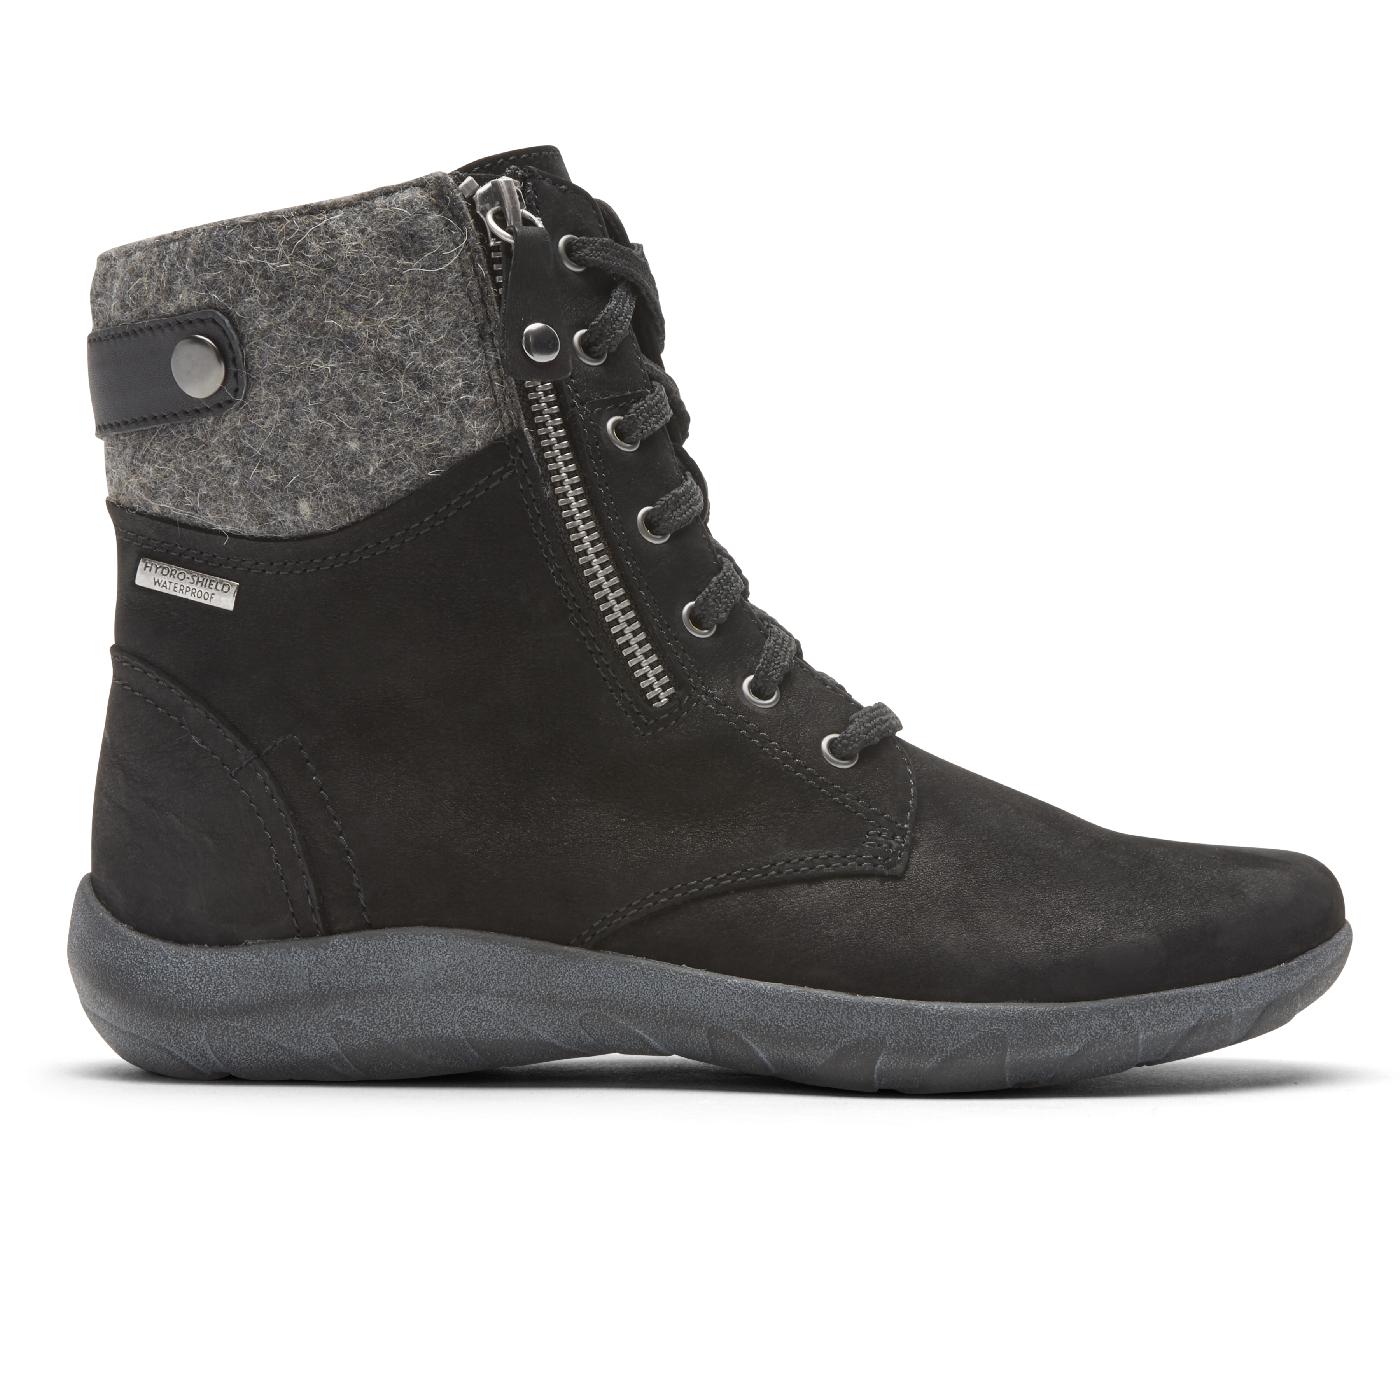 Rockport Cobb Hill Amalie Lace Waterproof Leather Booties in Black ...